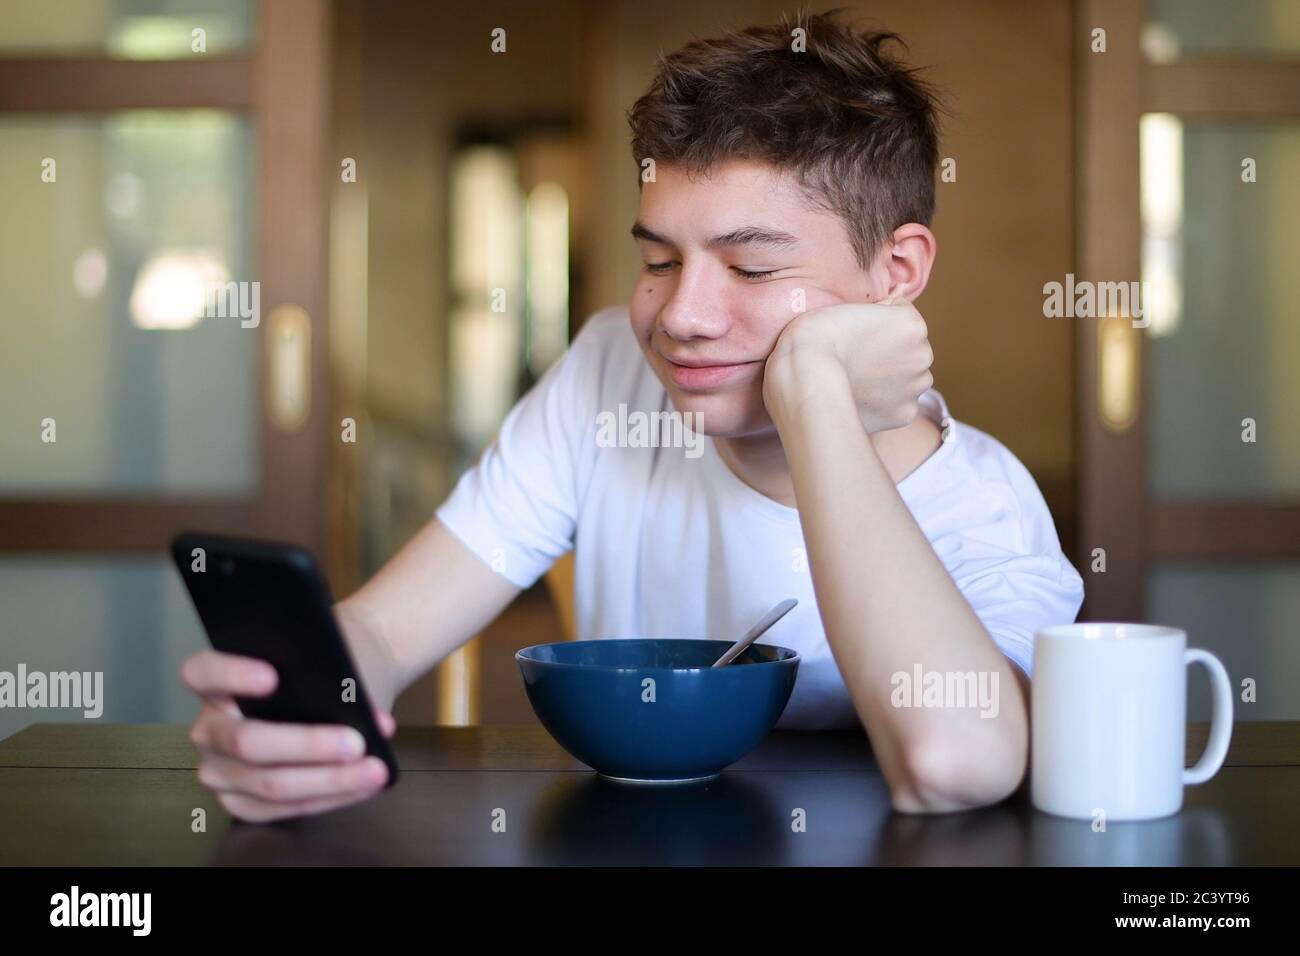 teenager is texting on a smartphone over a plate of porridge during breakfast Stock Photo